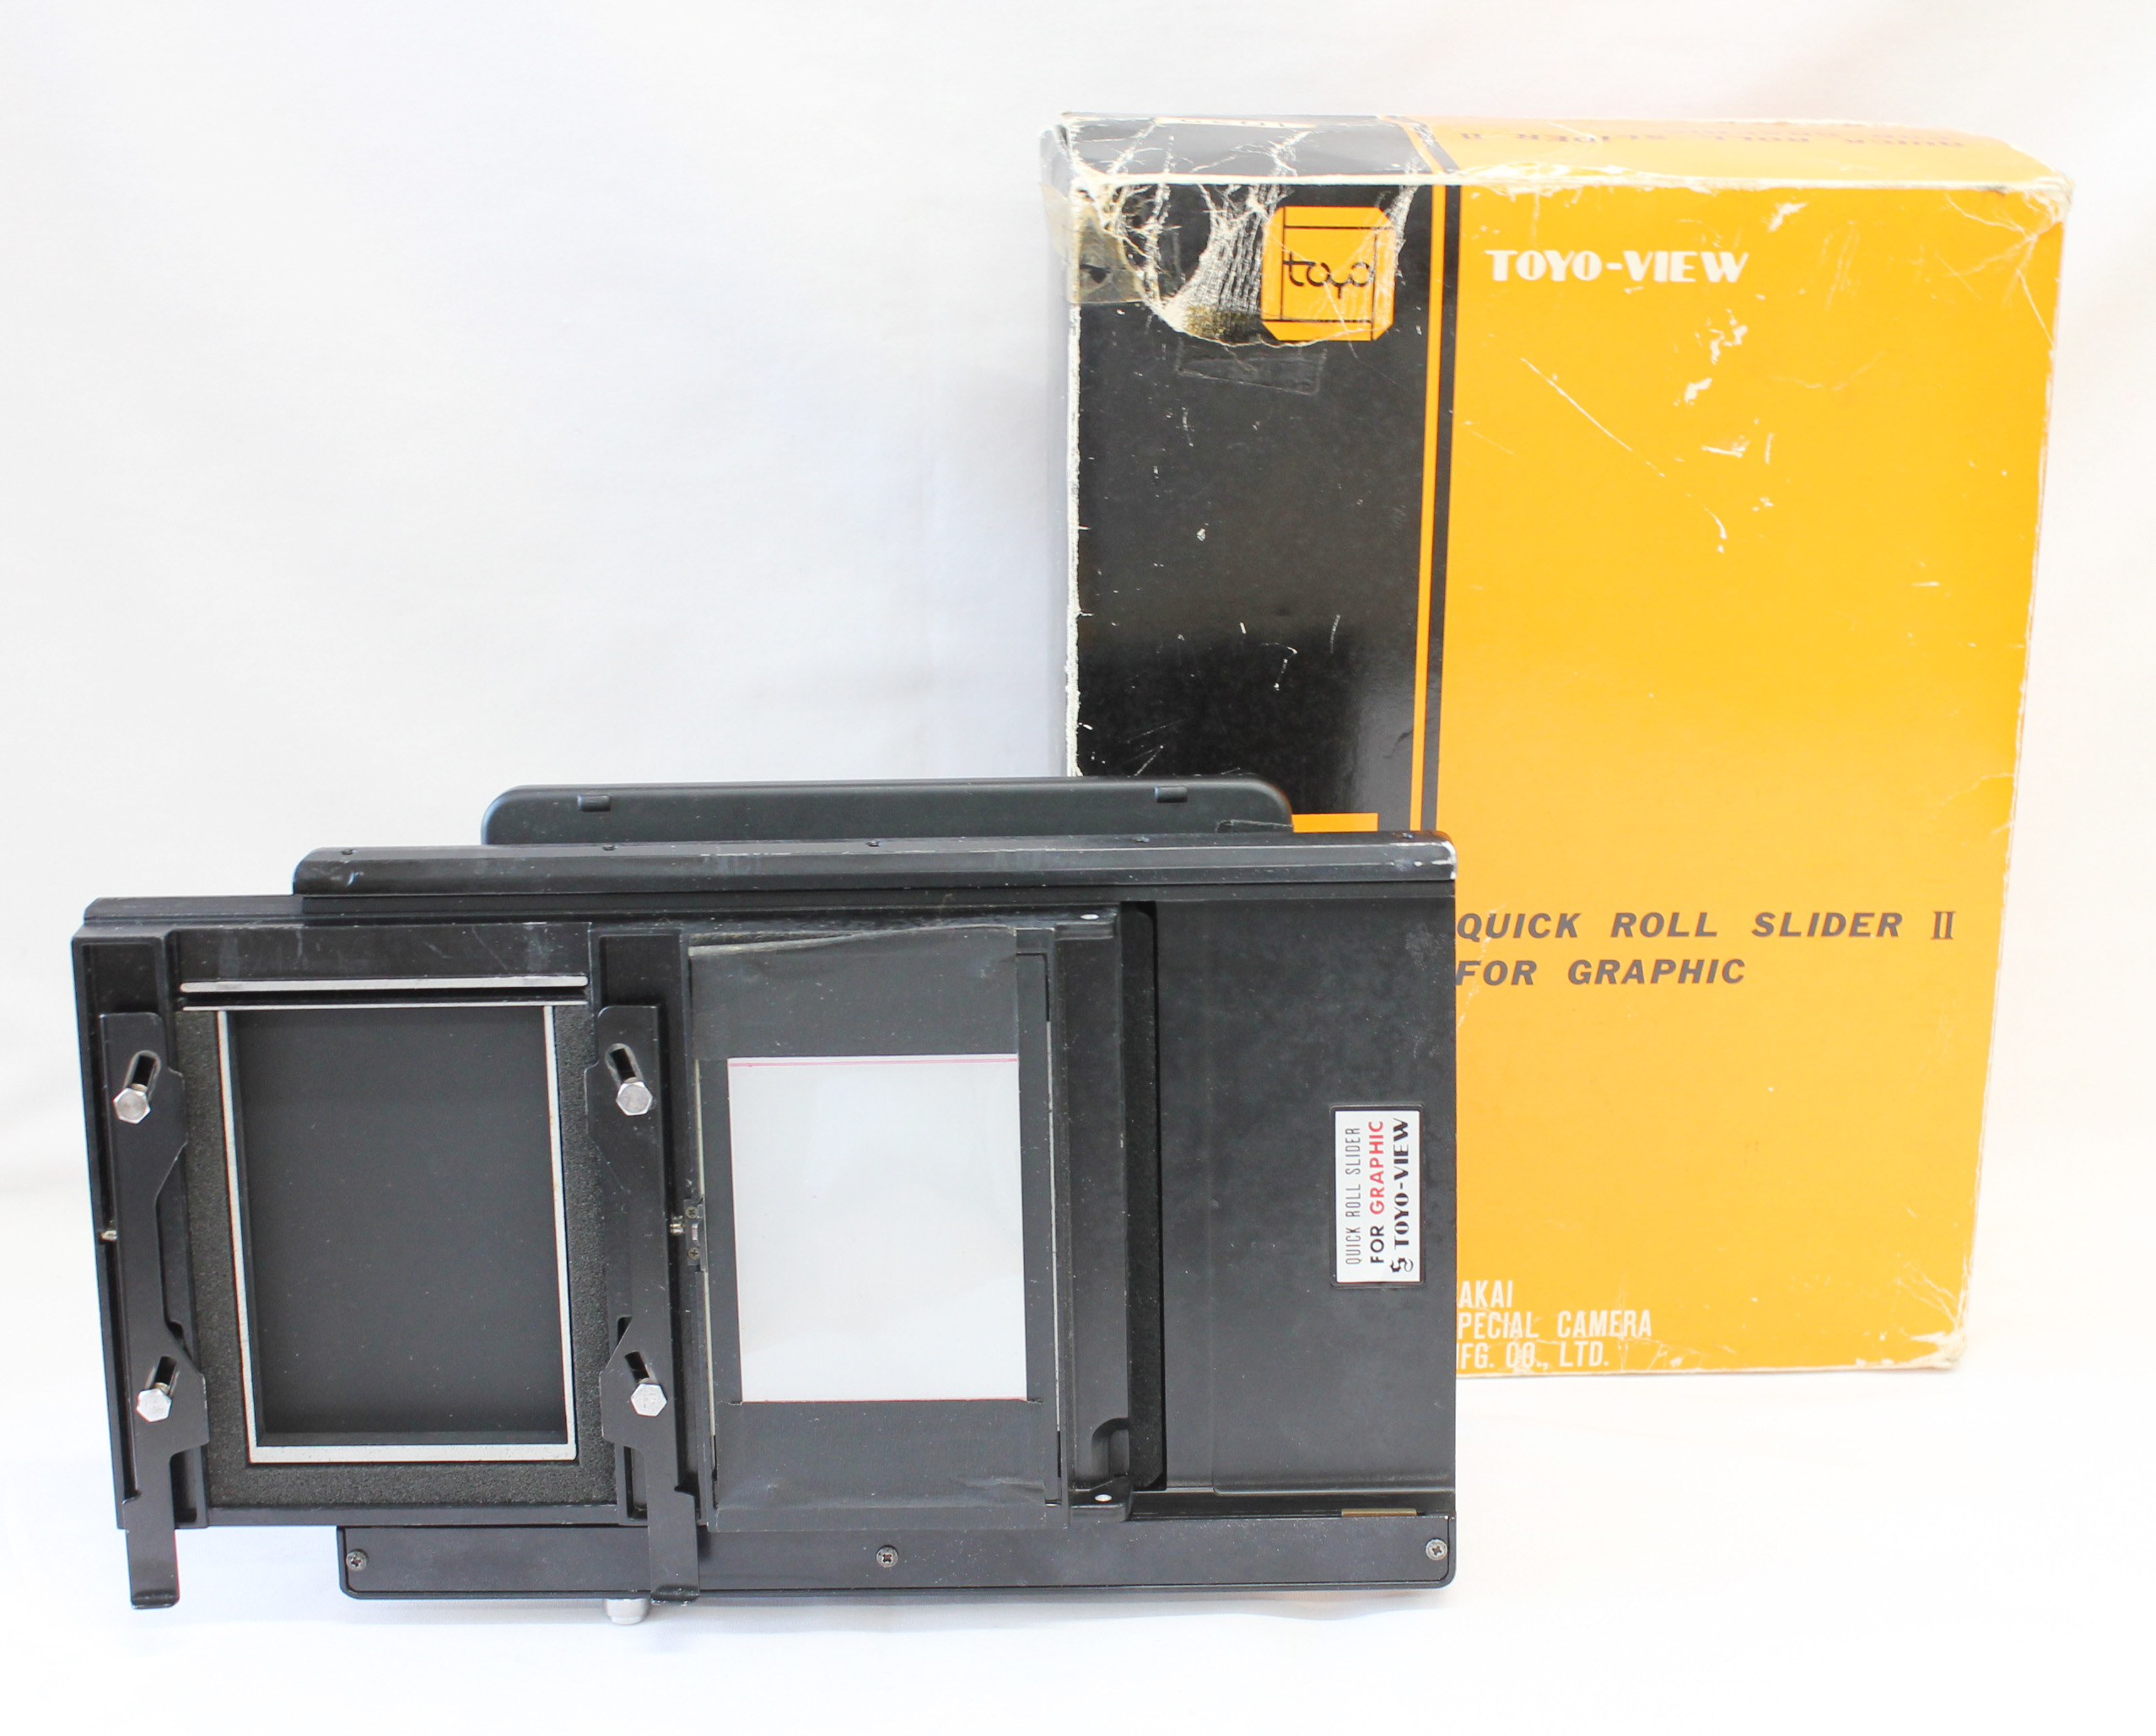 Japan Used Camera Shop | Toyo Toyo-View Quick Roll Slider II for Graphic No.1035 SG II 4V in Box from Japan